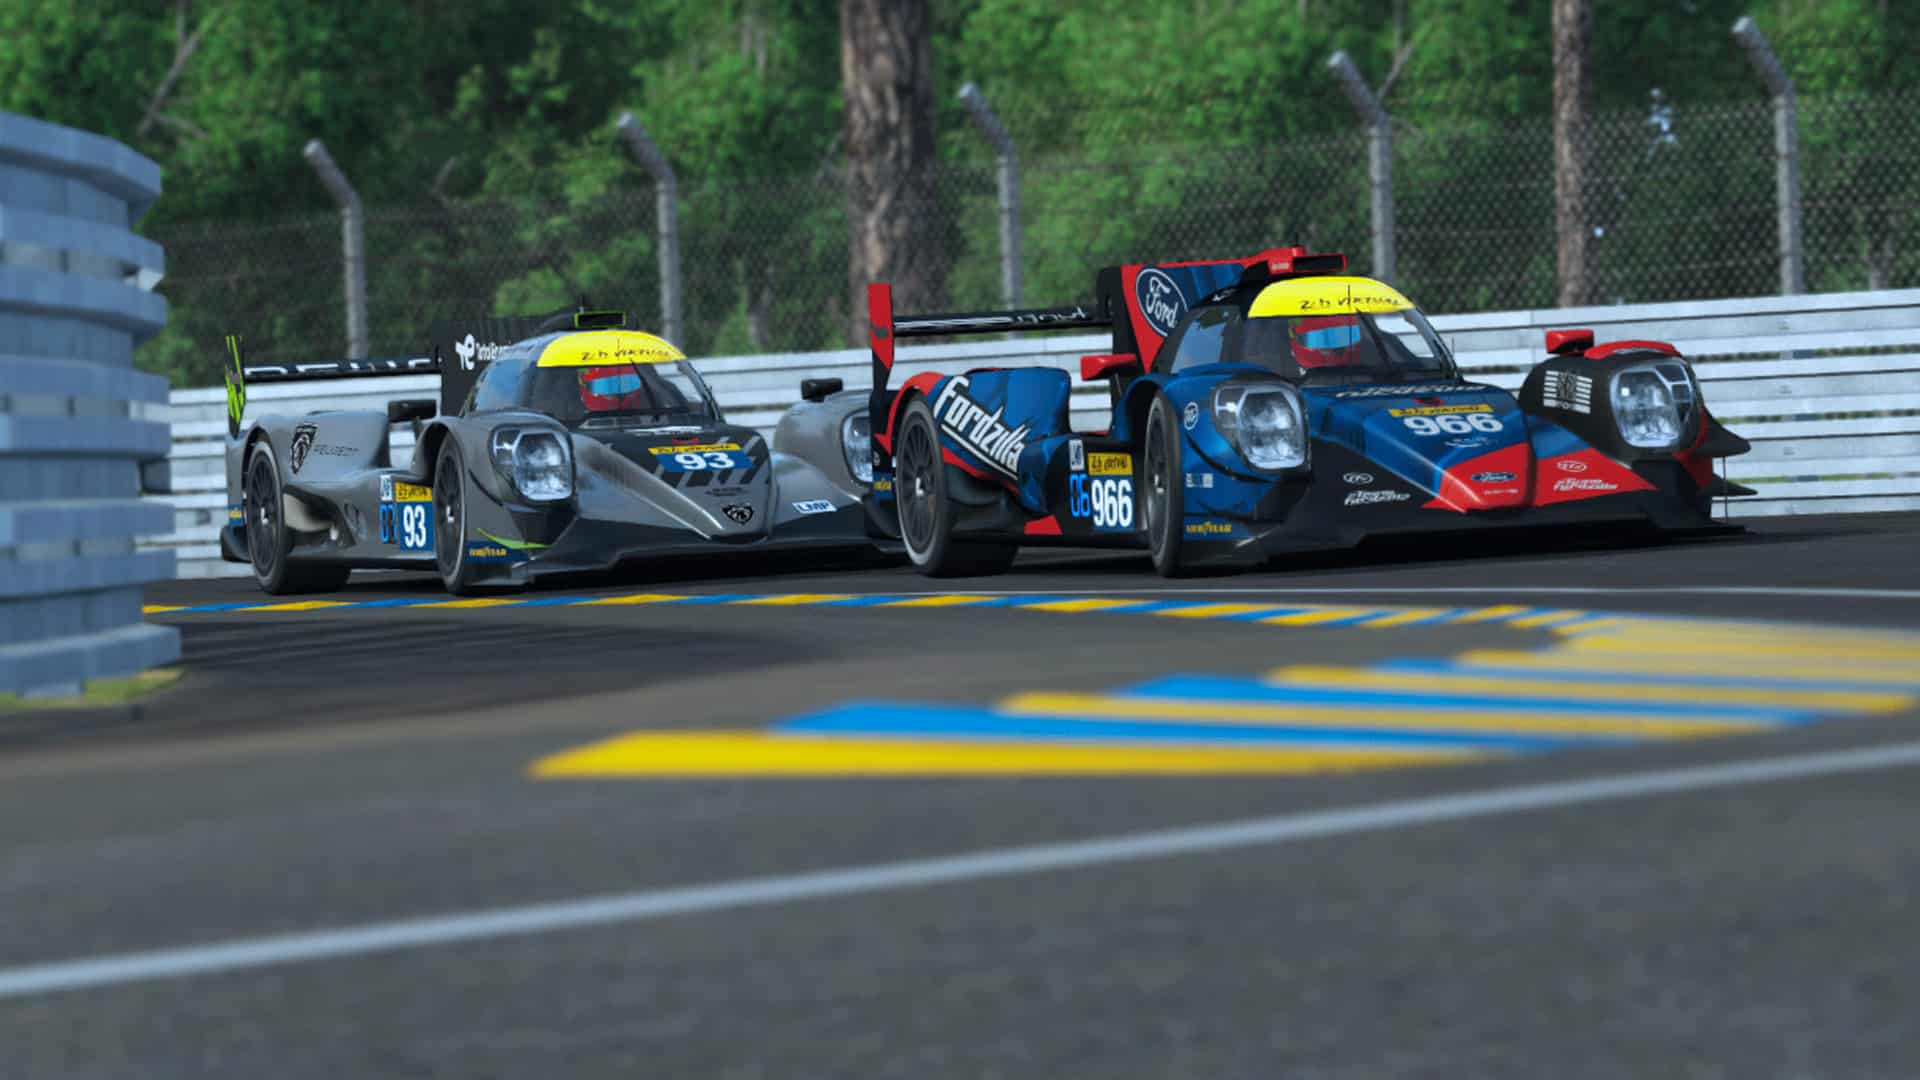 Over 35 TV or OTT stations to broadcast 2023 24 Hours of Le Mans Virtual Traxion